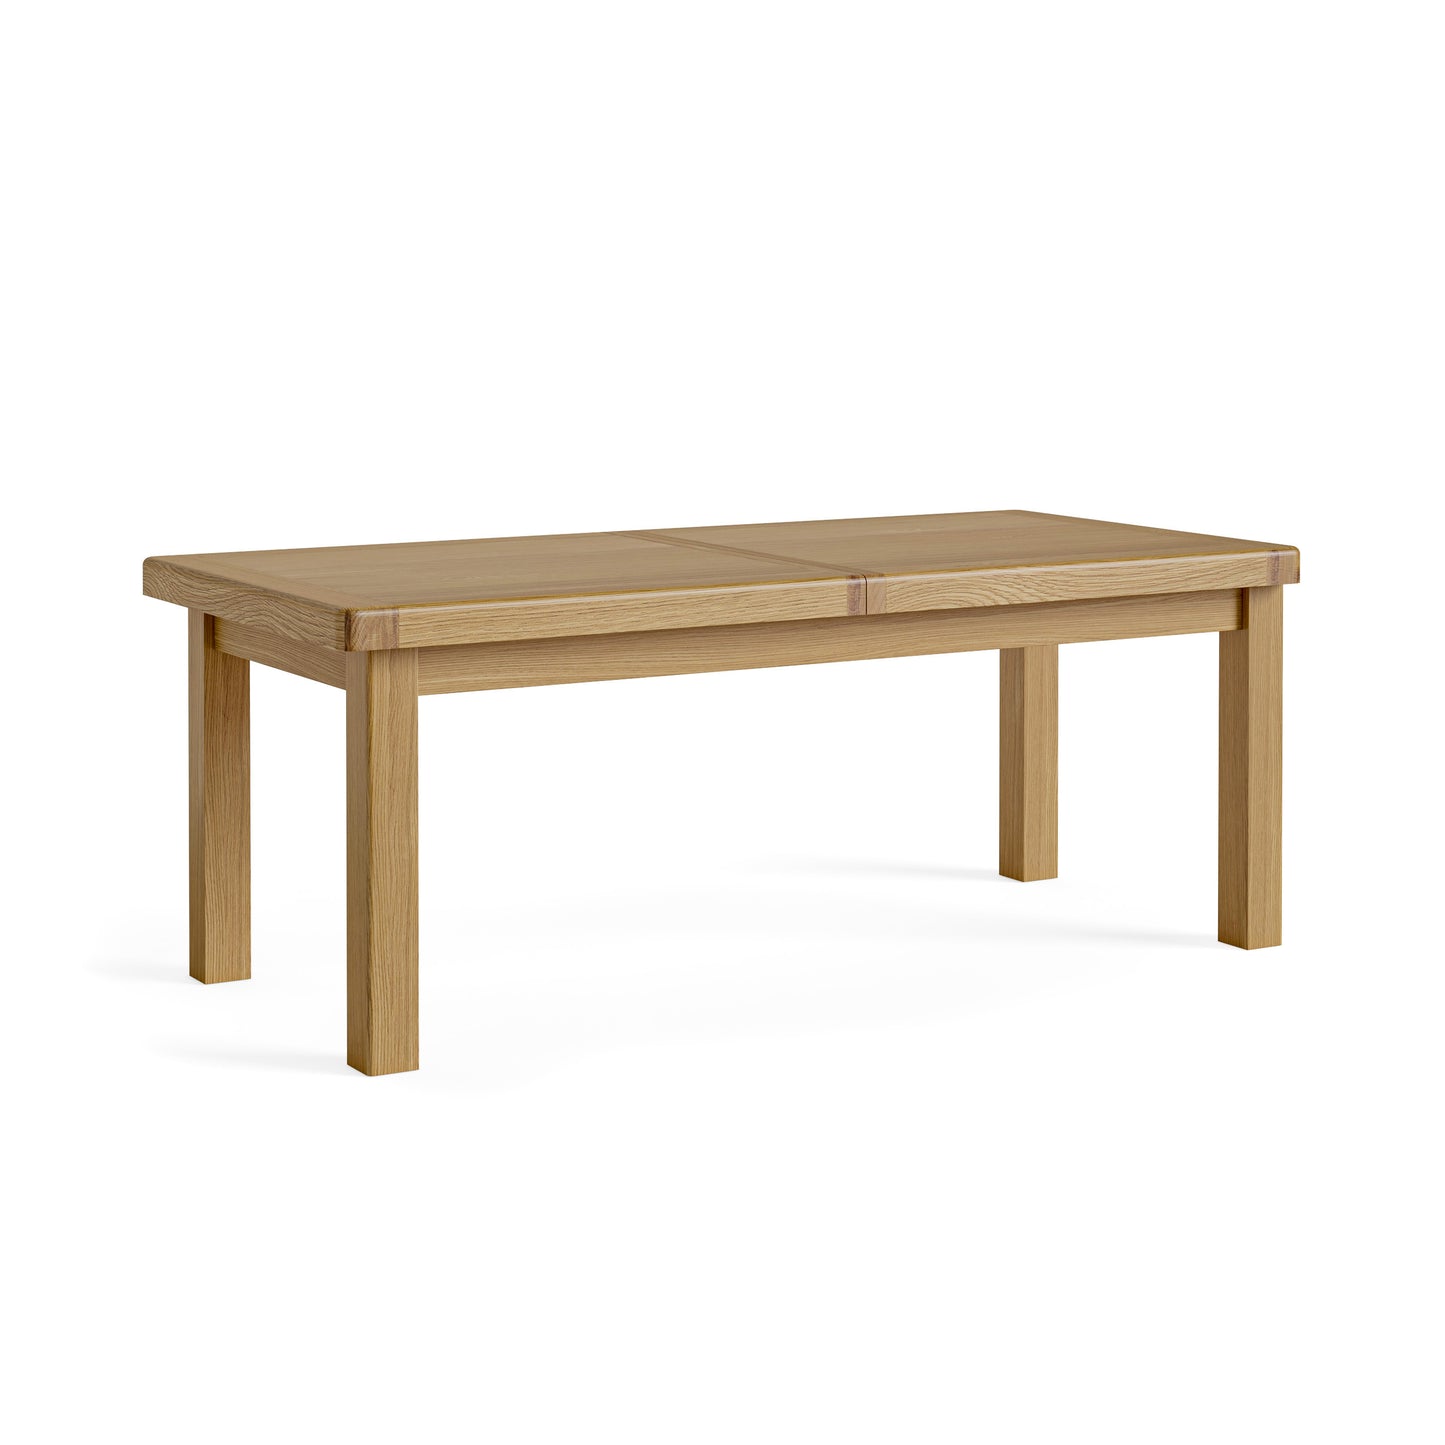 Normandy Oak Large Extending Dining Table